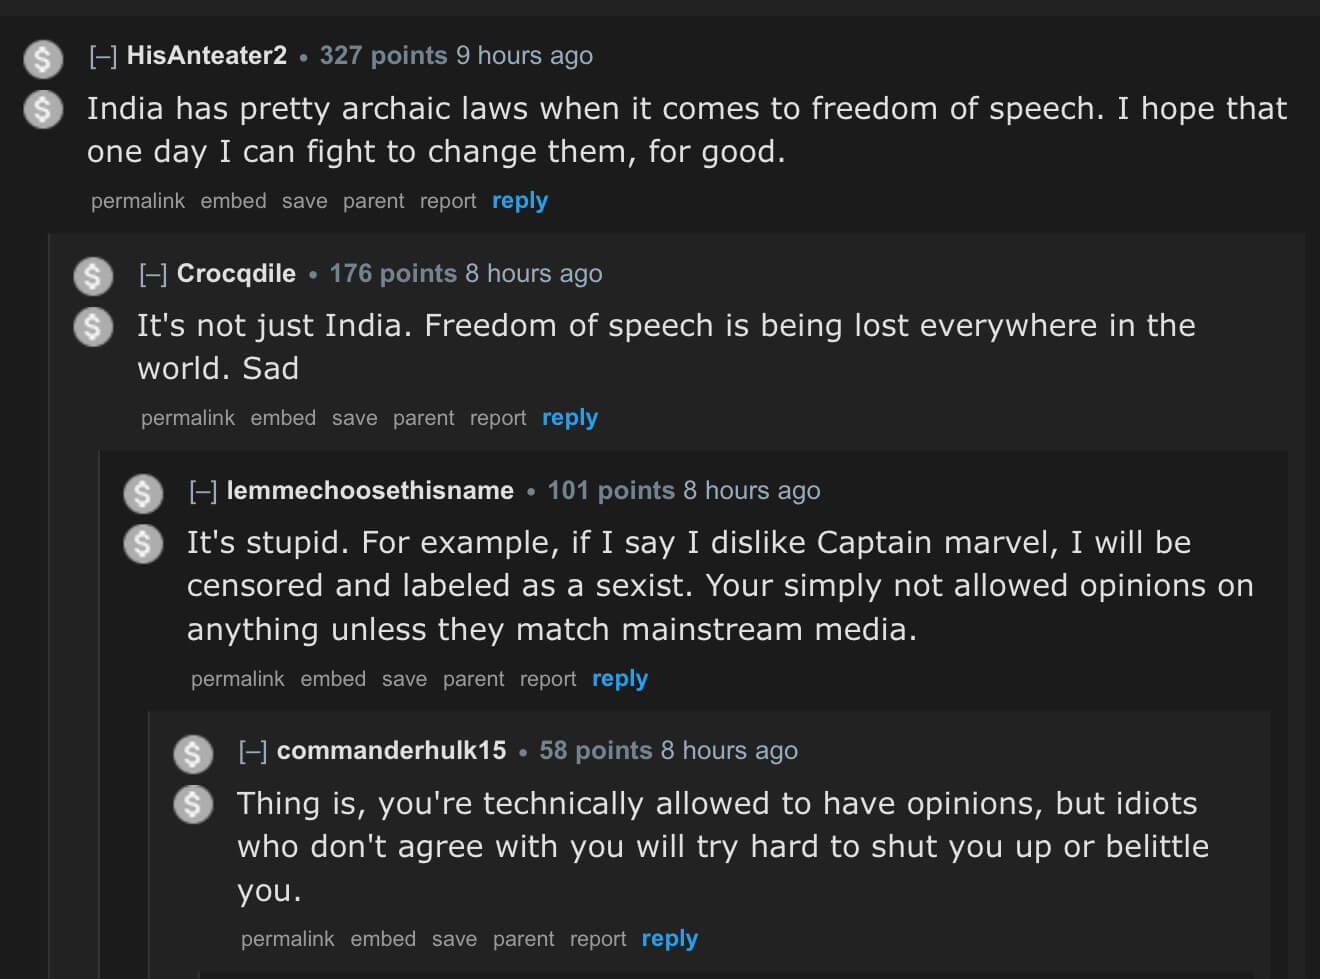 Reddit users claiming this takedown order highlights India’s archaic freedom of speech laws and represents a wider loss of freedom of speech around the world.